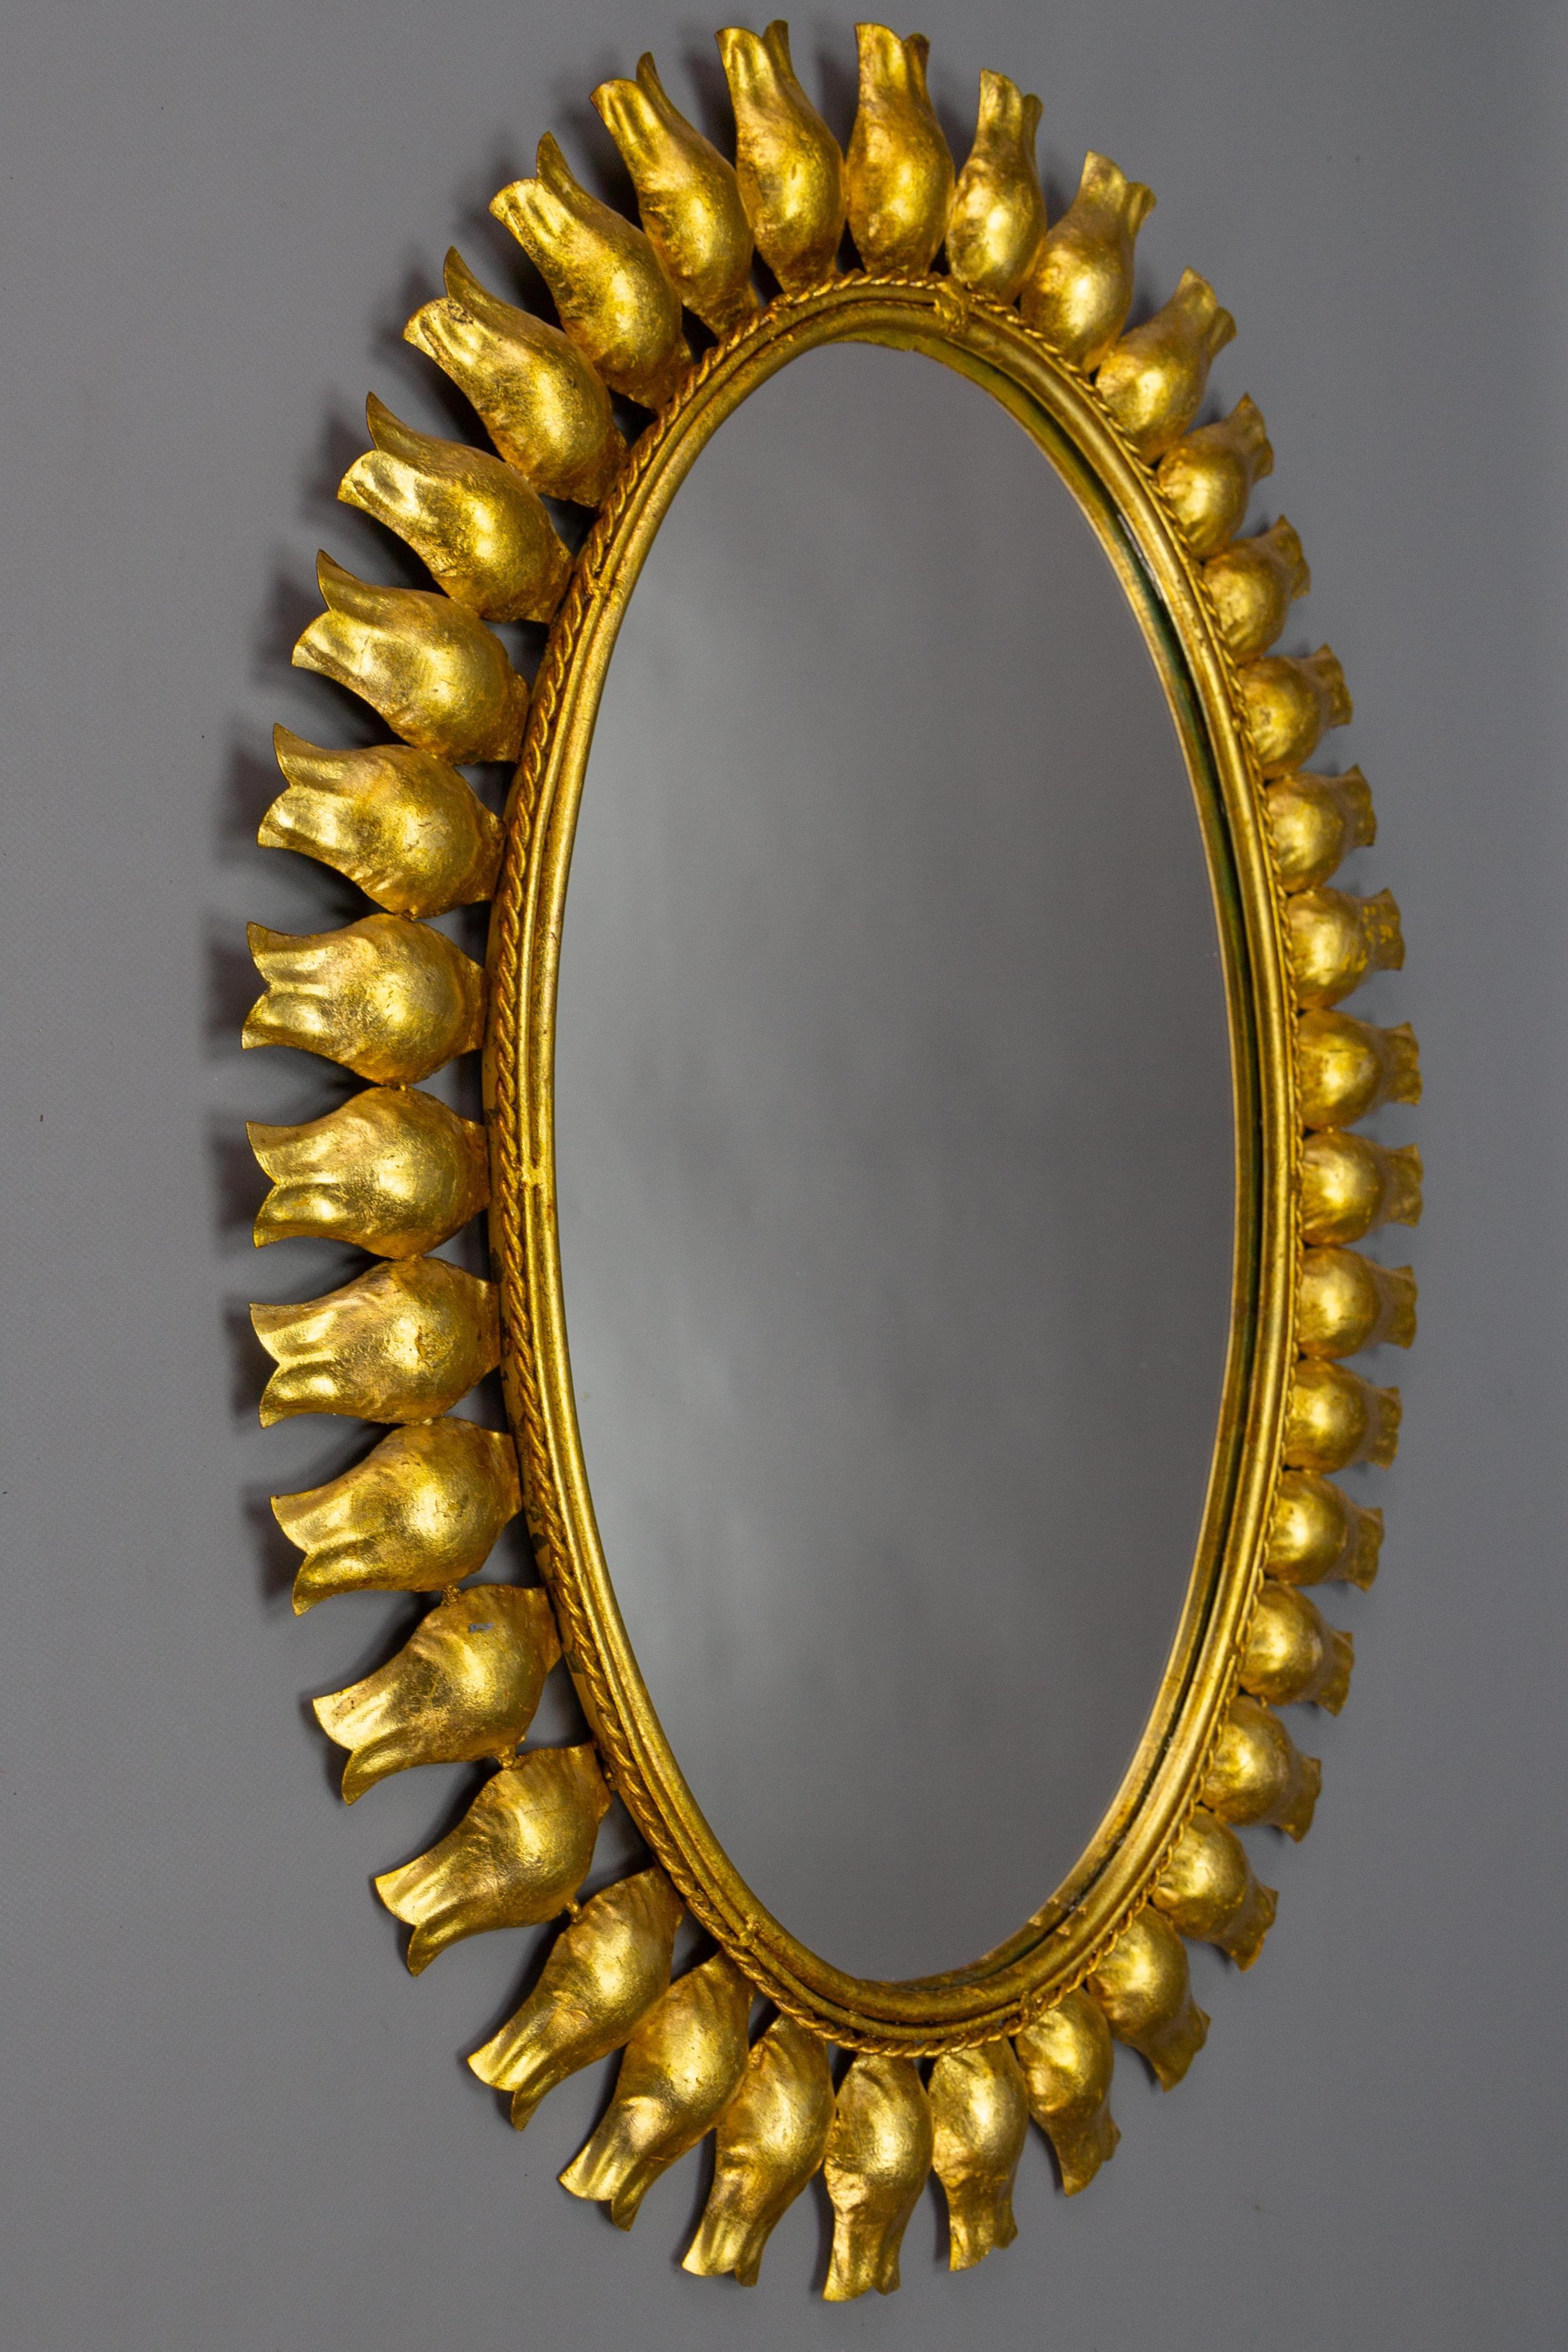 Mid-century gilt metal sunburst-shaped mirror, Germany, circa the 1950s.
A beautiful Hollywood Regency-style oval sun- or sunburst-shaped mirror with a gilt metal frame with petal motifs.
Dimensions: height: 79 cm / 31.1 in; width: 57 cm / 22.44 in;